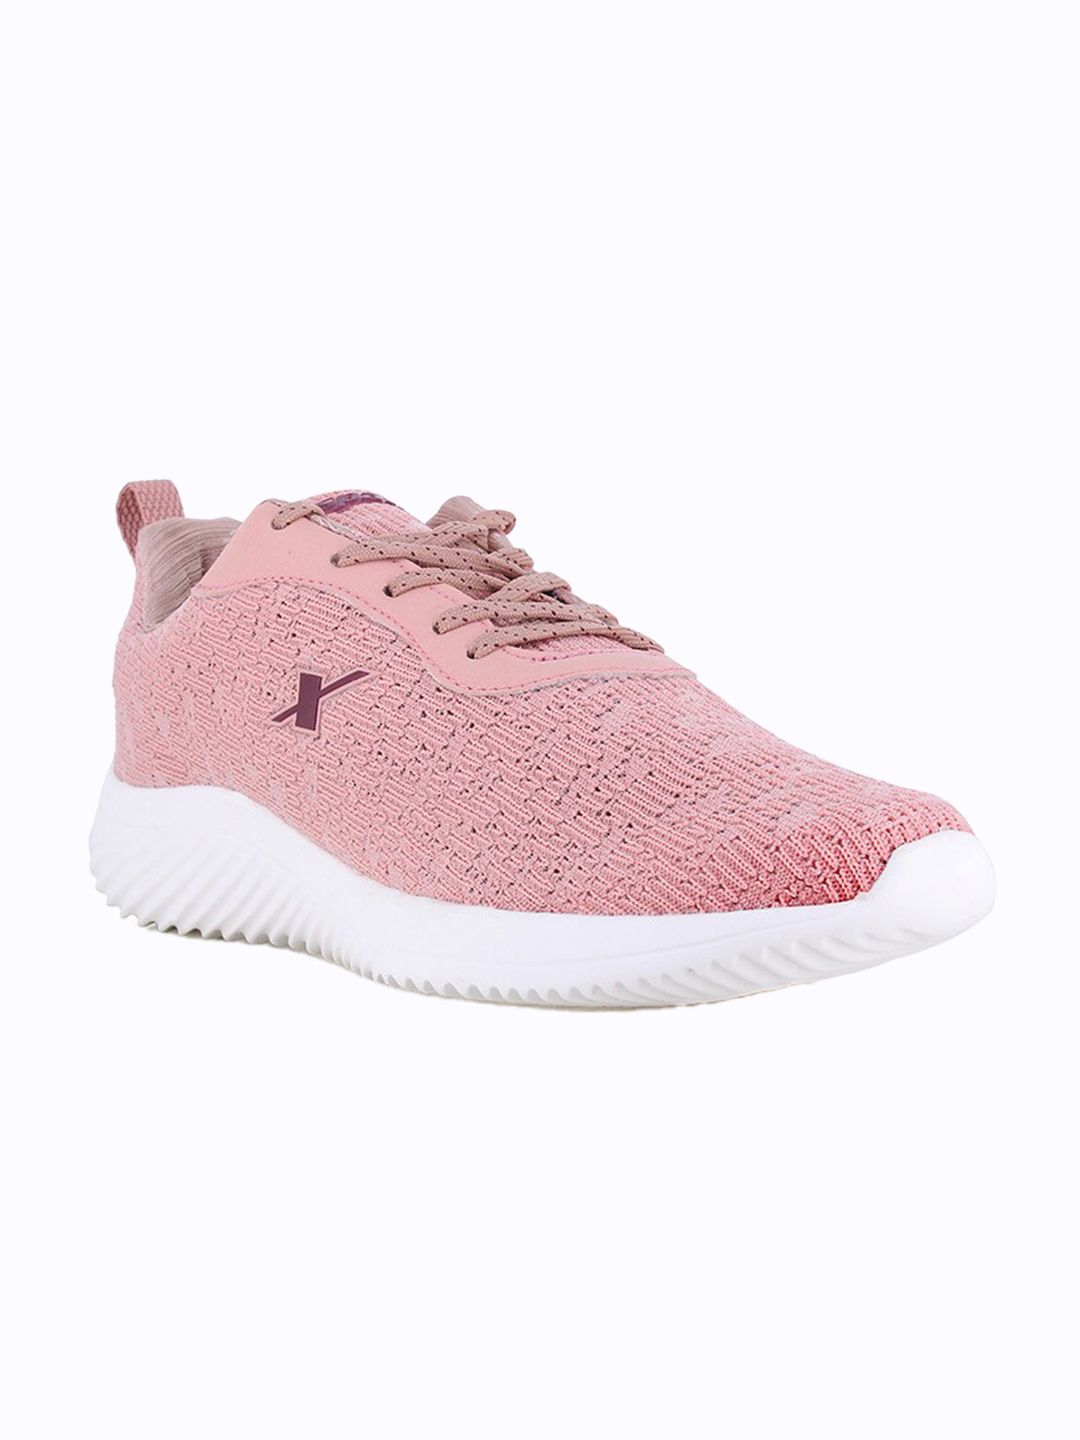 Sparx Women Peach-Coloured Textile Running Non-Marking Shoes Price in India